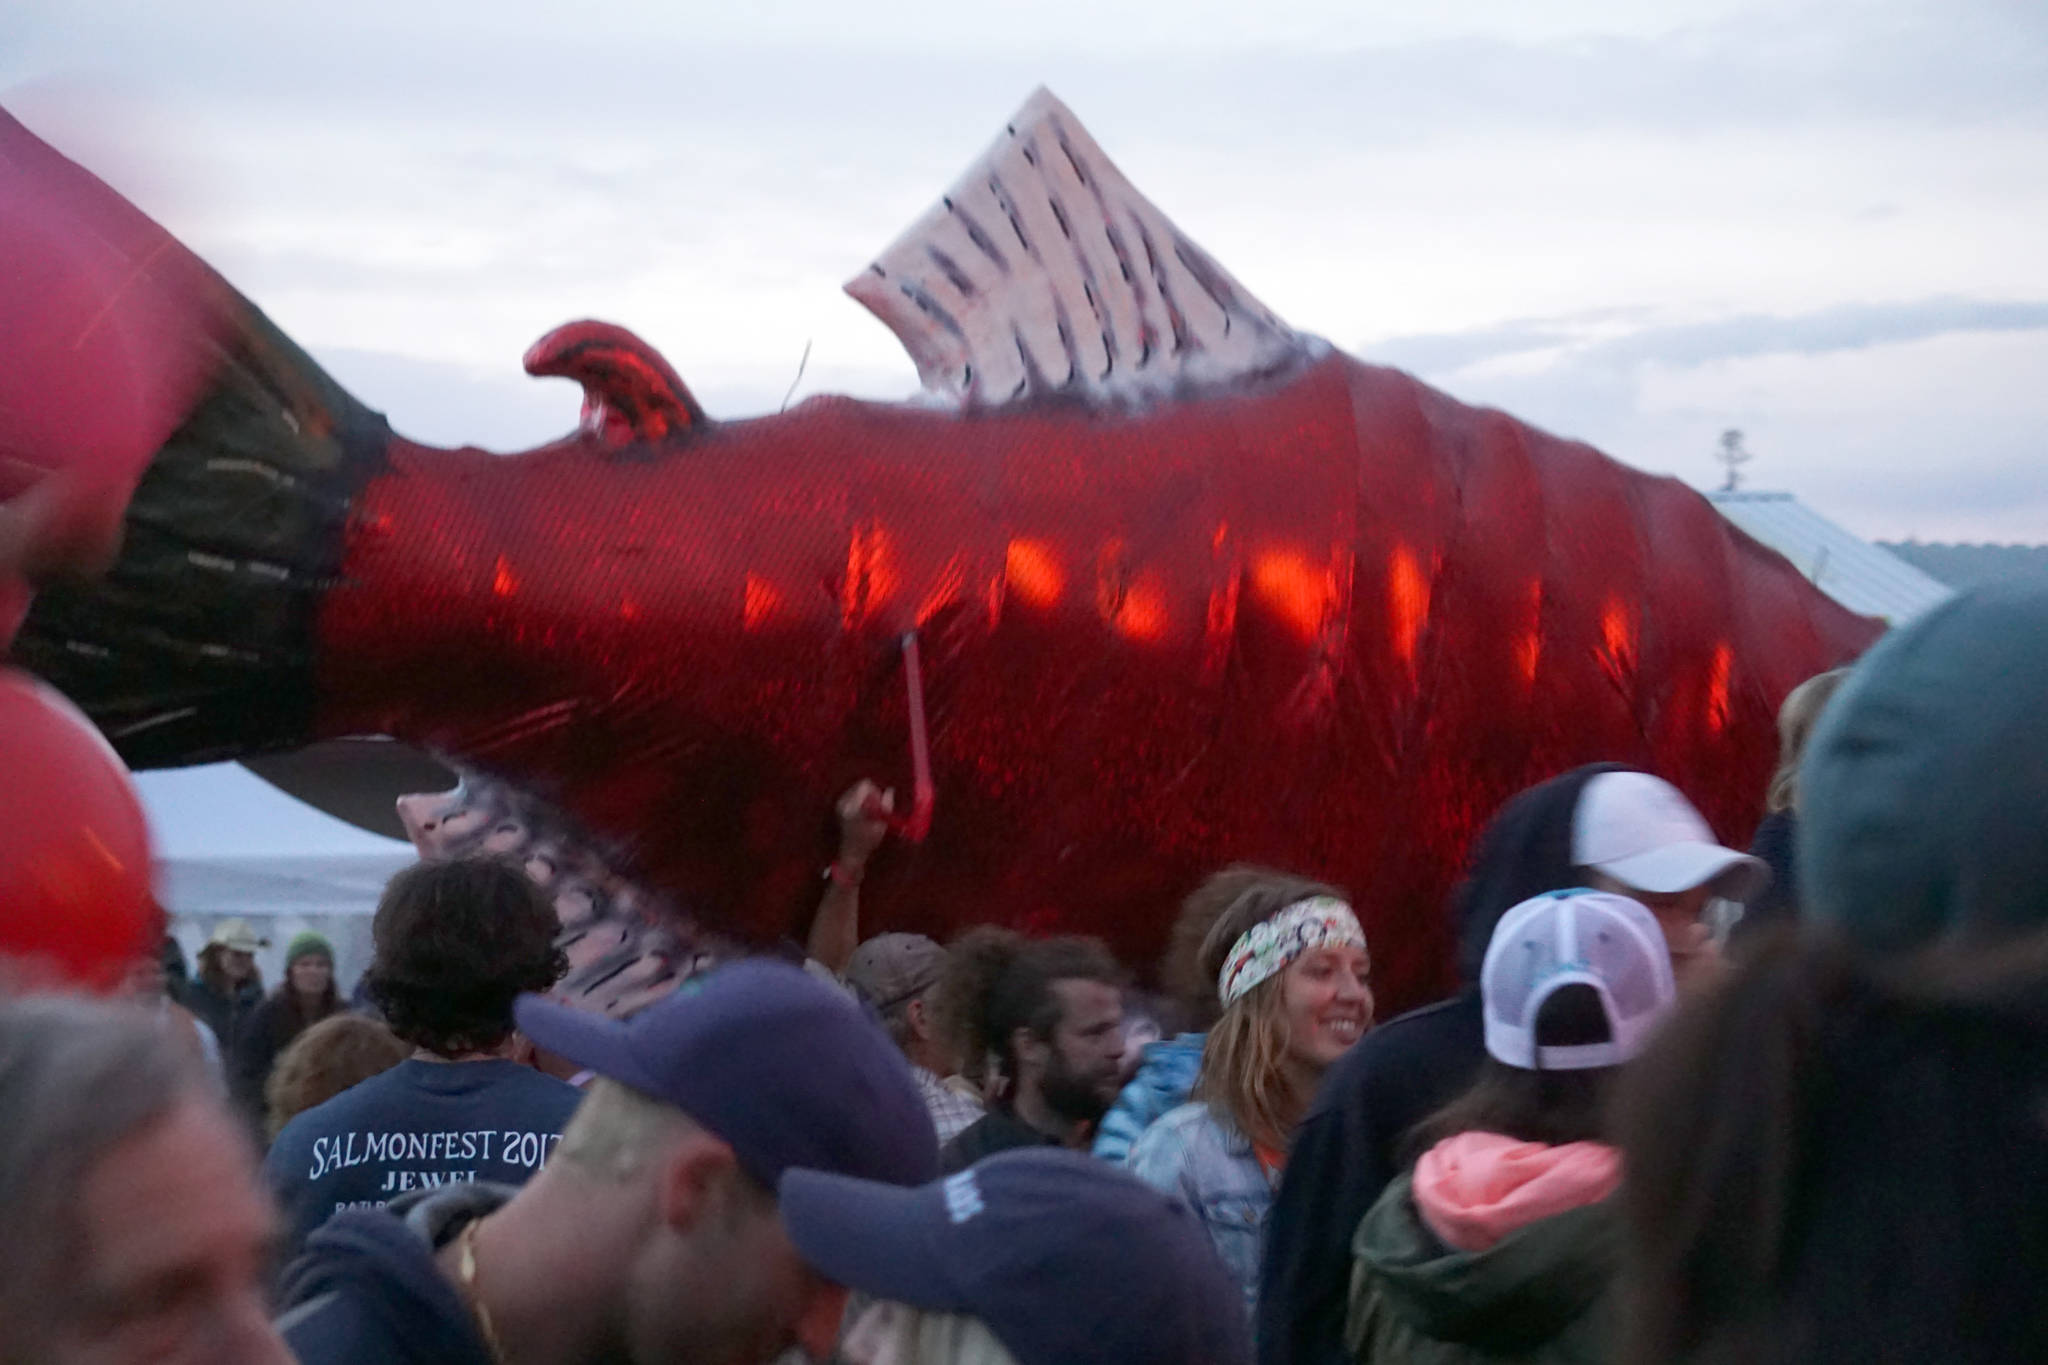 A giant salmon puppet swims through the crows as Rusted Root performs on Saturday night, Aug. 5, 2017, at Salmonfest, Ninilchik, Alaska.(Photo by Michael Armstrong, Homer News)